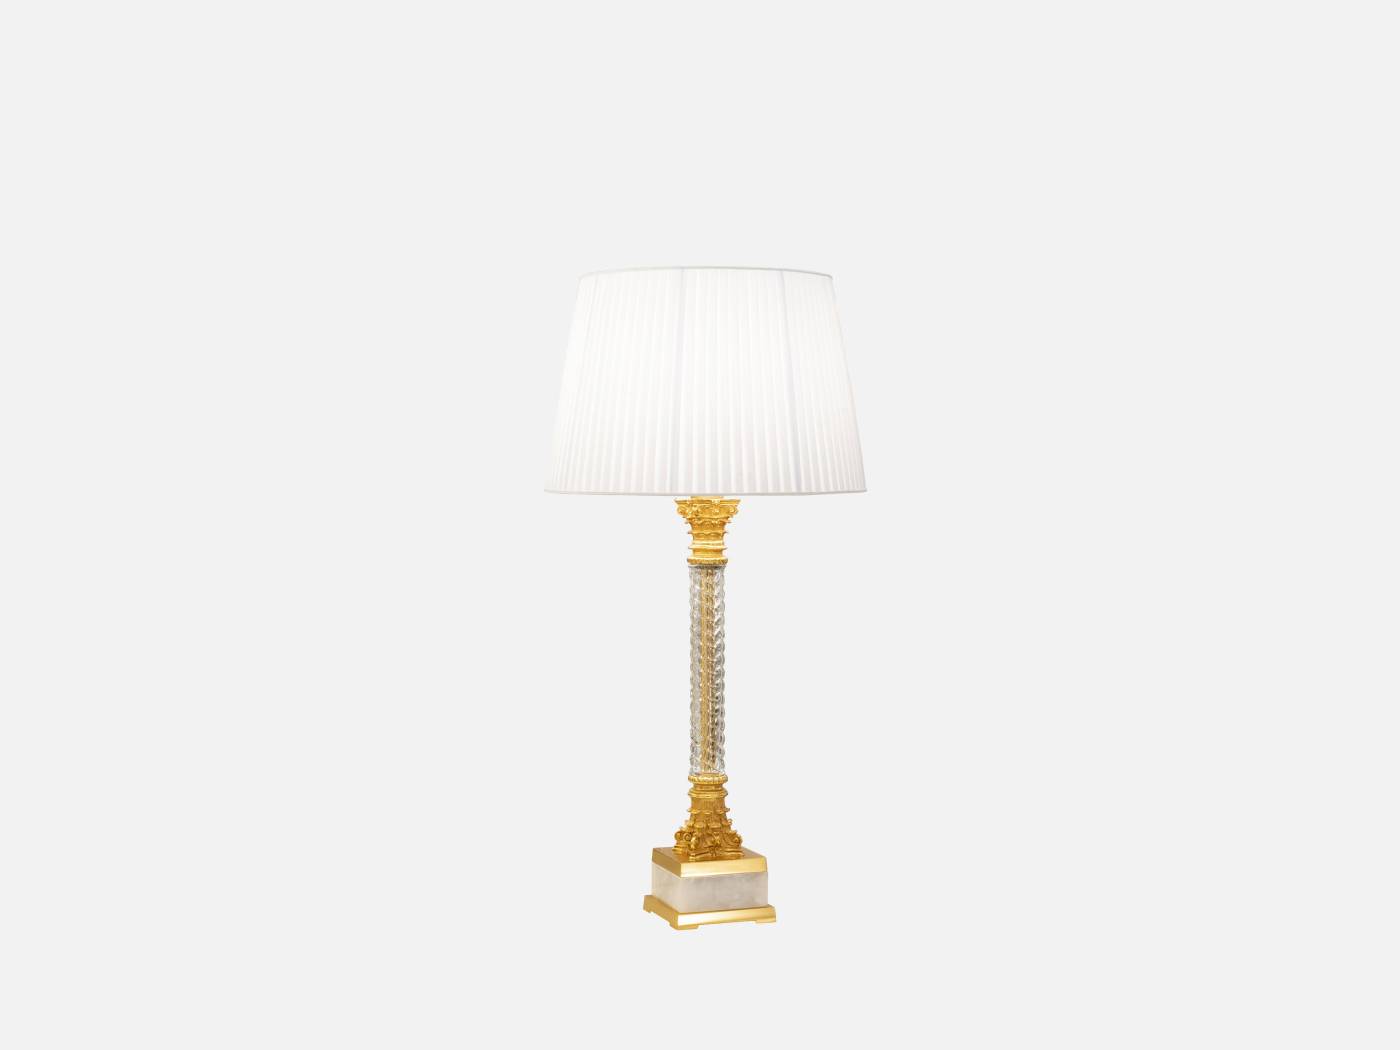 ART. 2302 – Discover the elegance of luxury classic Lighting made in Italy by C.G. Capelletti. Luxury classic furniture that combines style and craftsmanship.